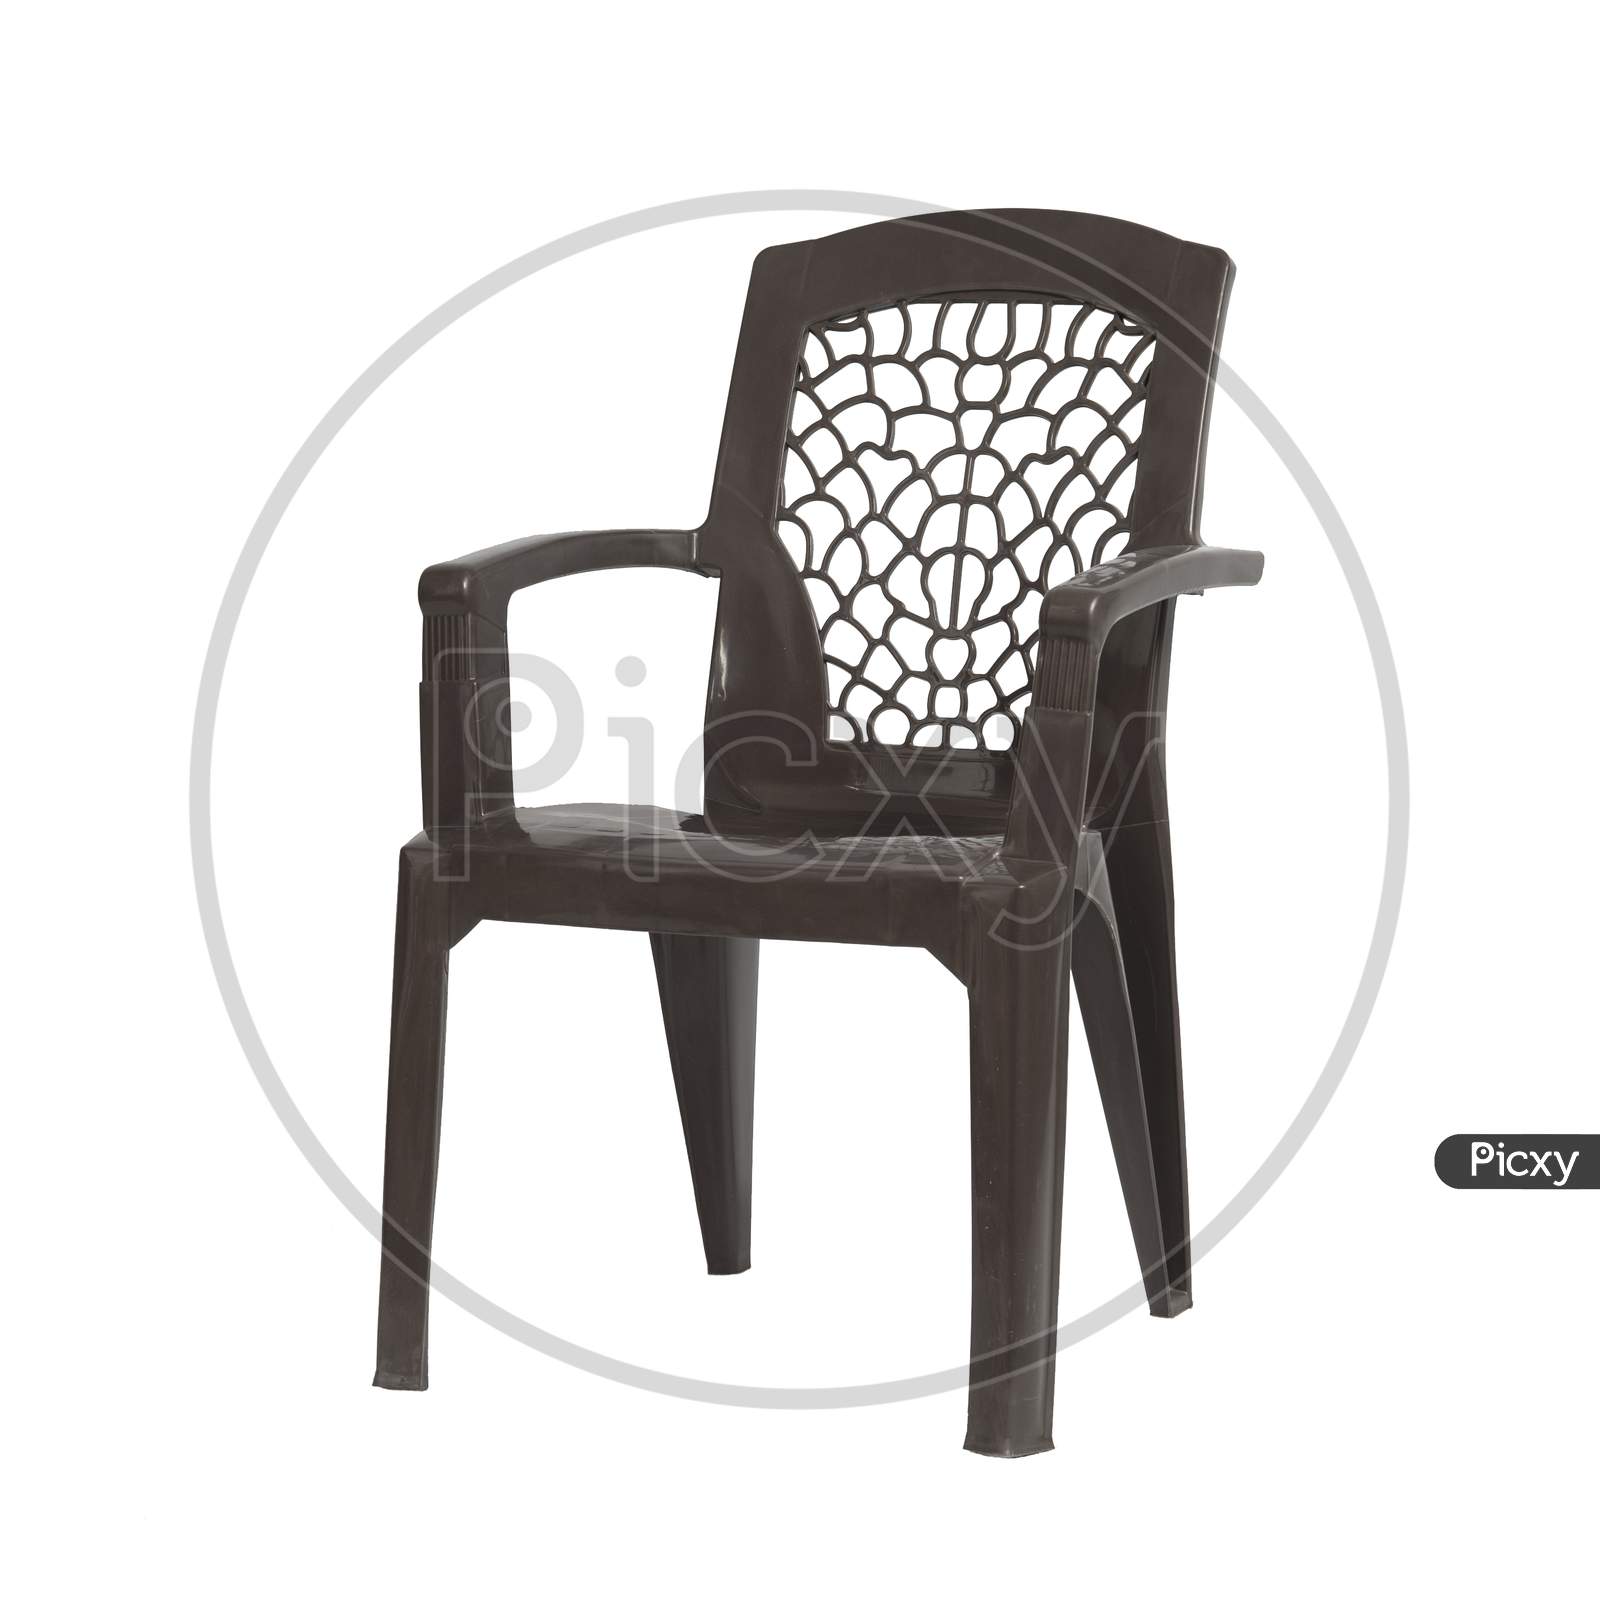 Plastic Chair in White Background